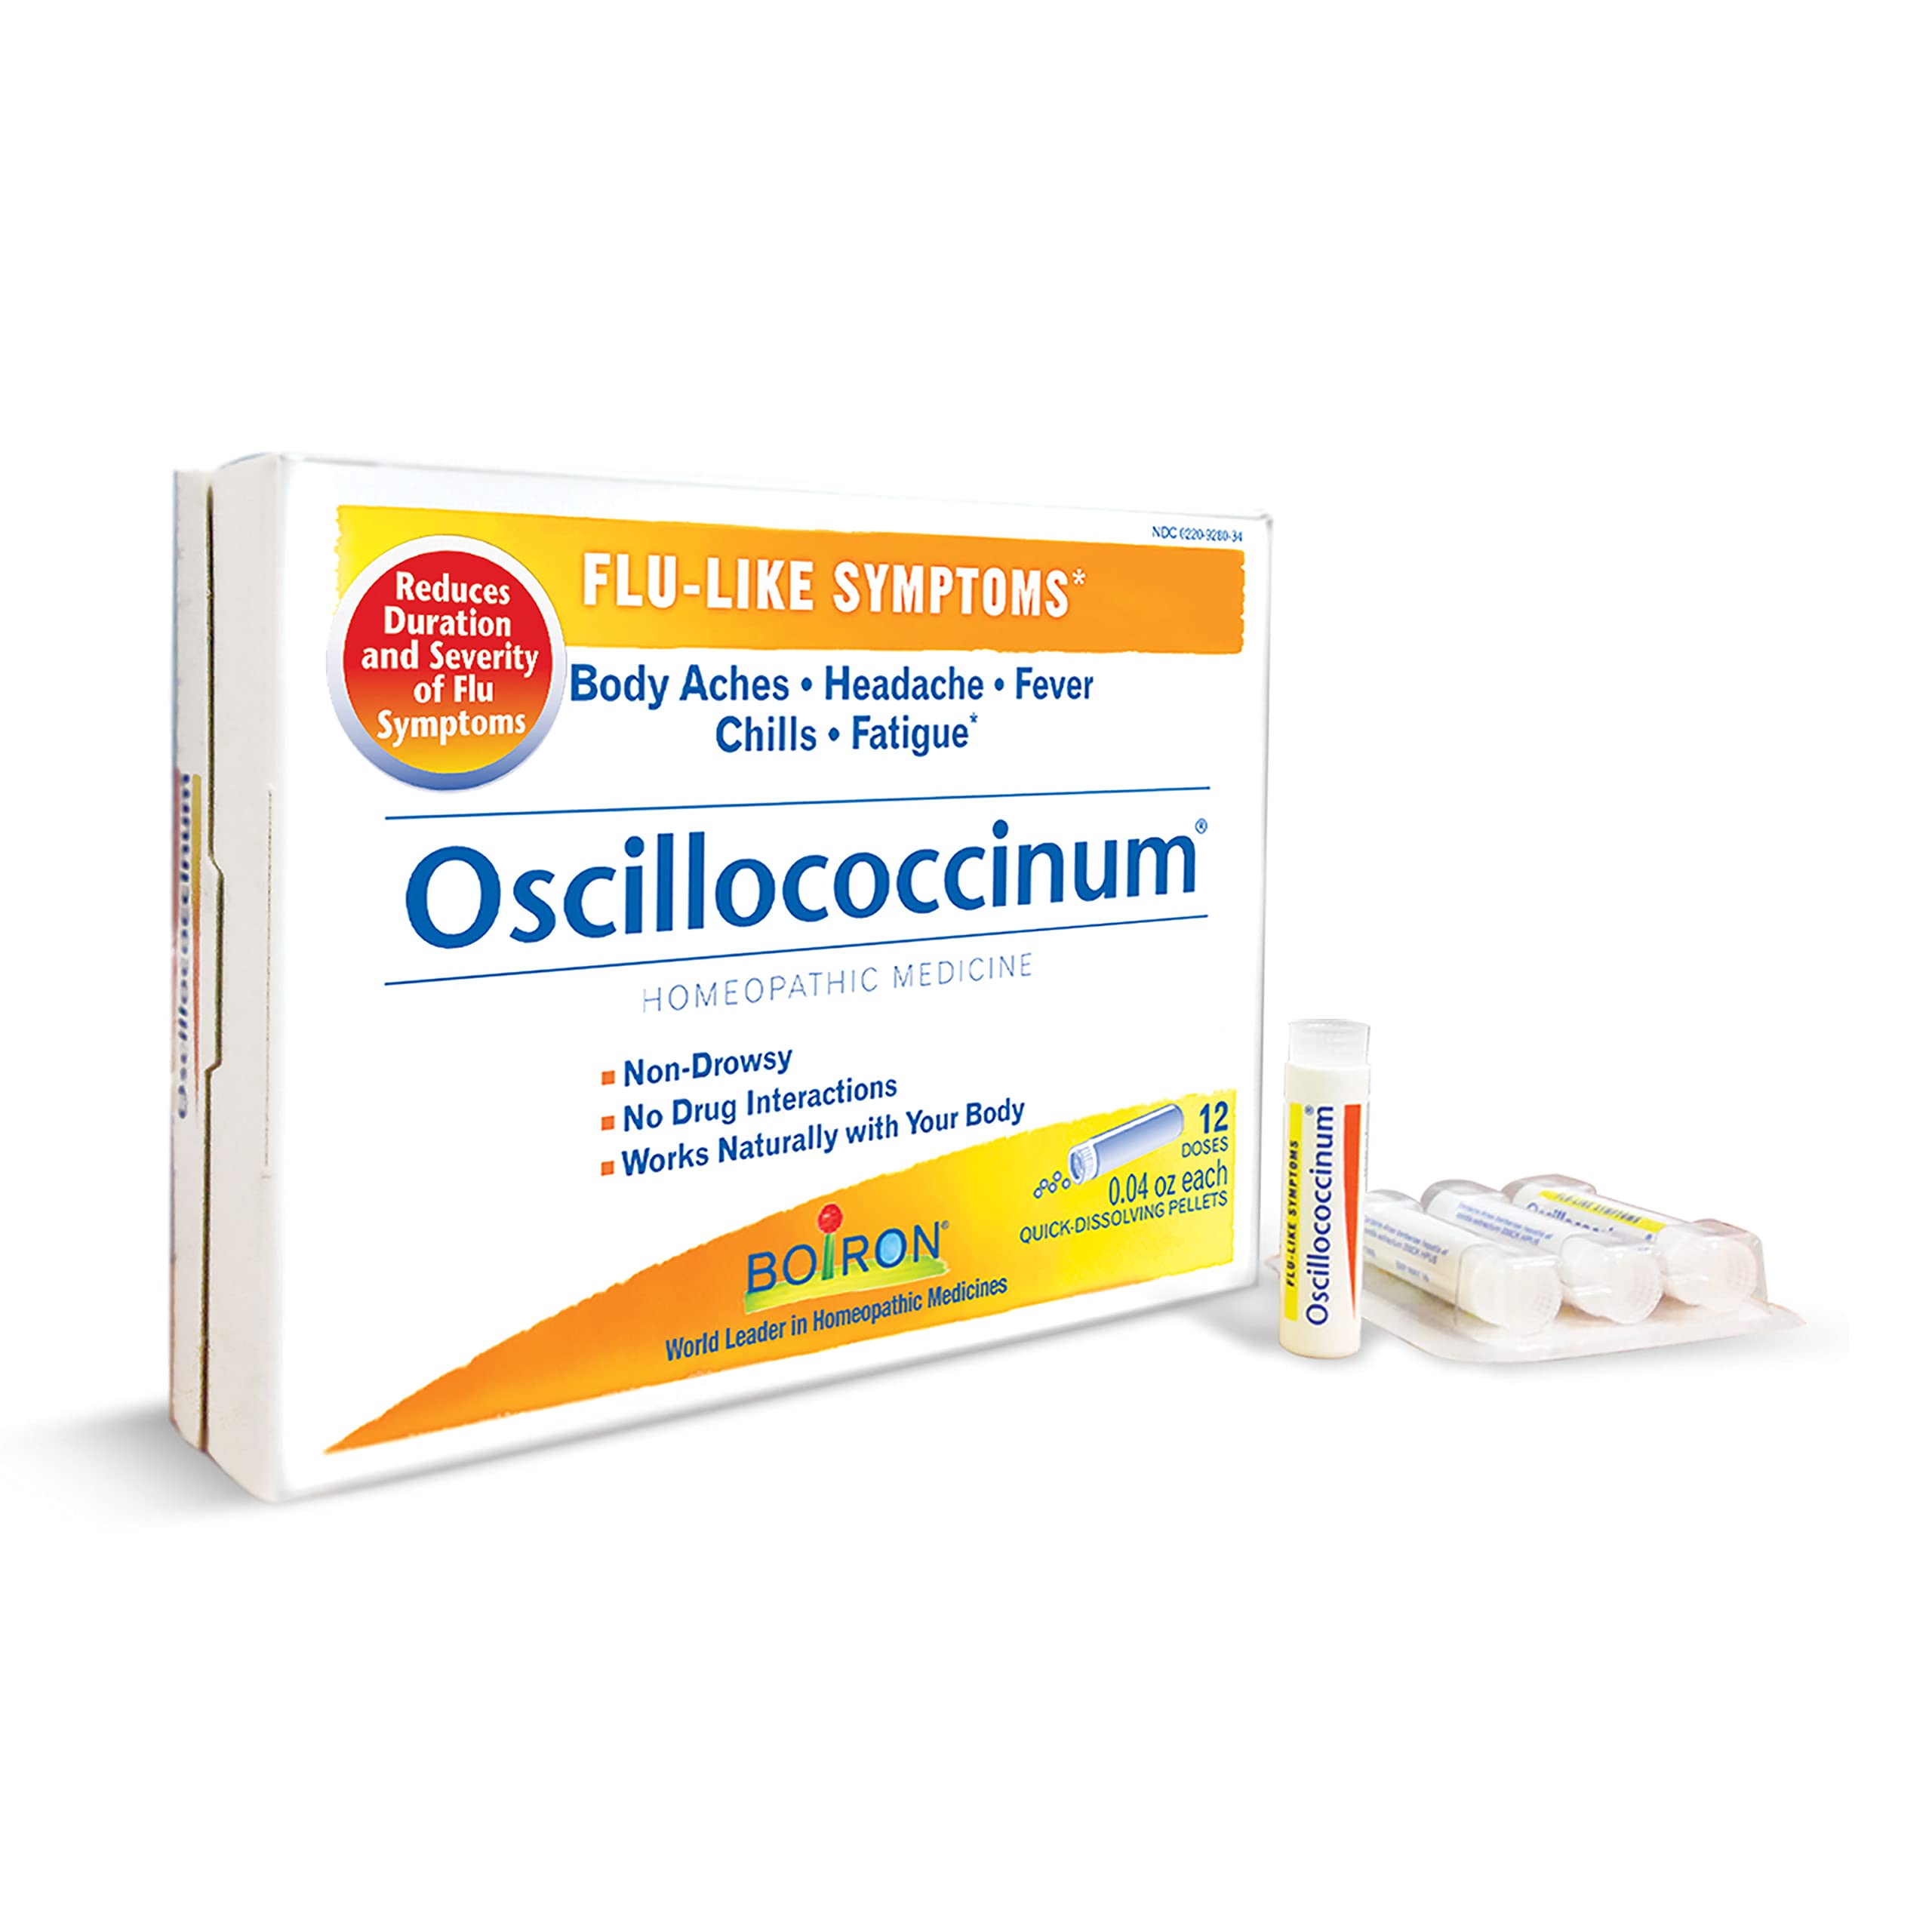 Boiron Oscillococcinum for Relief from Flu-Like Symptoms of Body Aches, Headache, Fever, Chills, and Fatigue - 12 Count